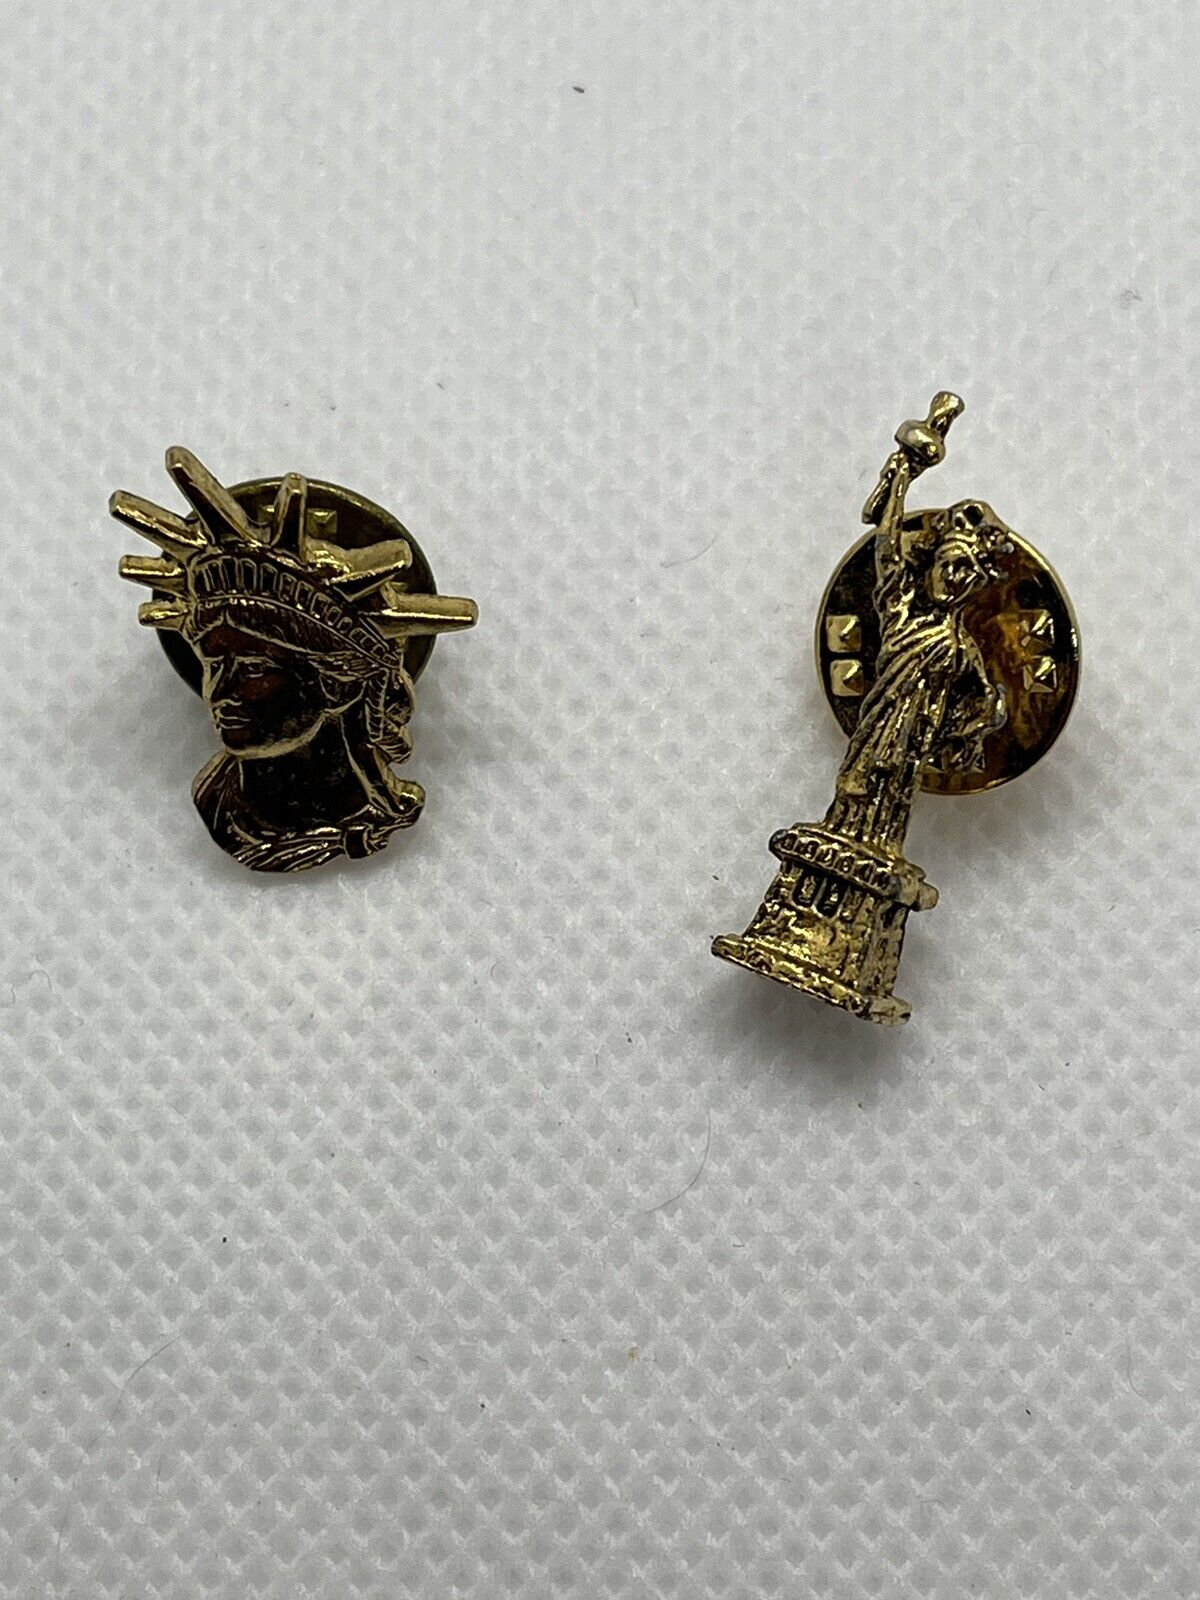 2 Vintage Statue Of Liberty Hat Pins USA